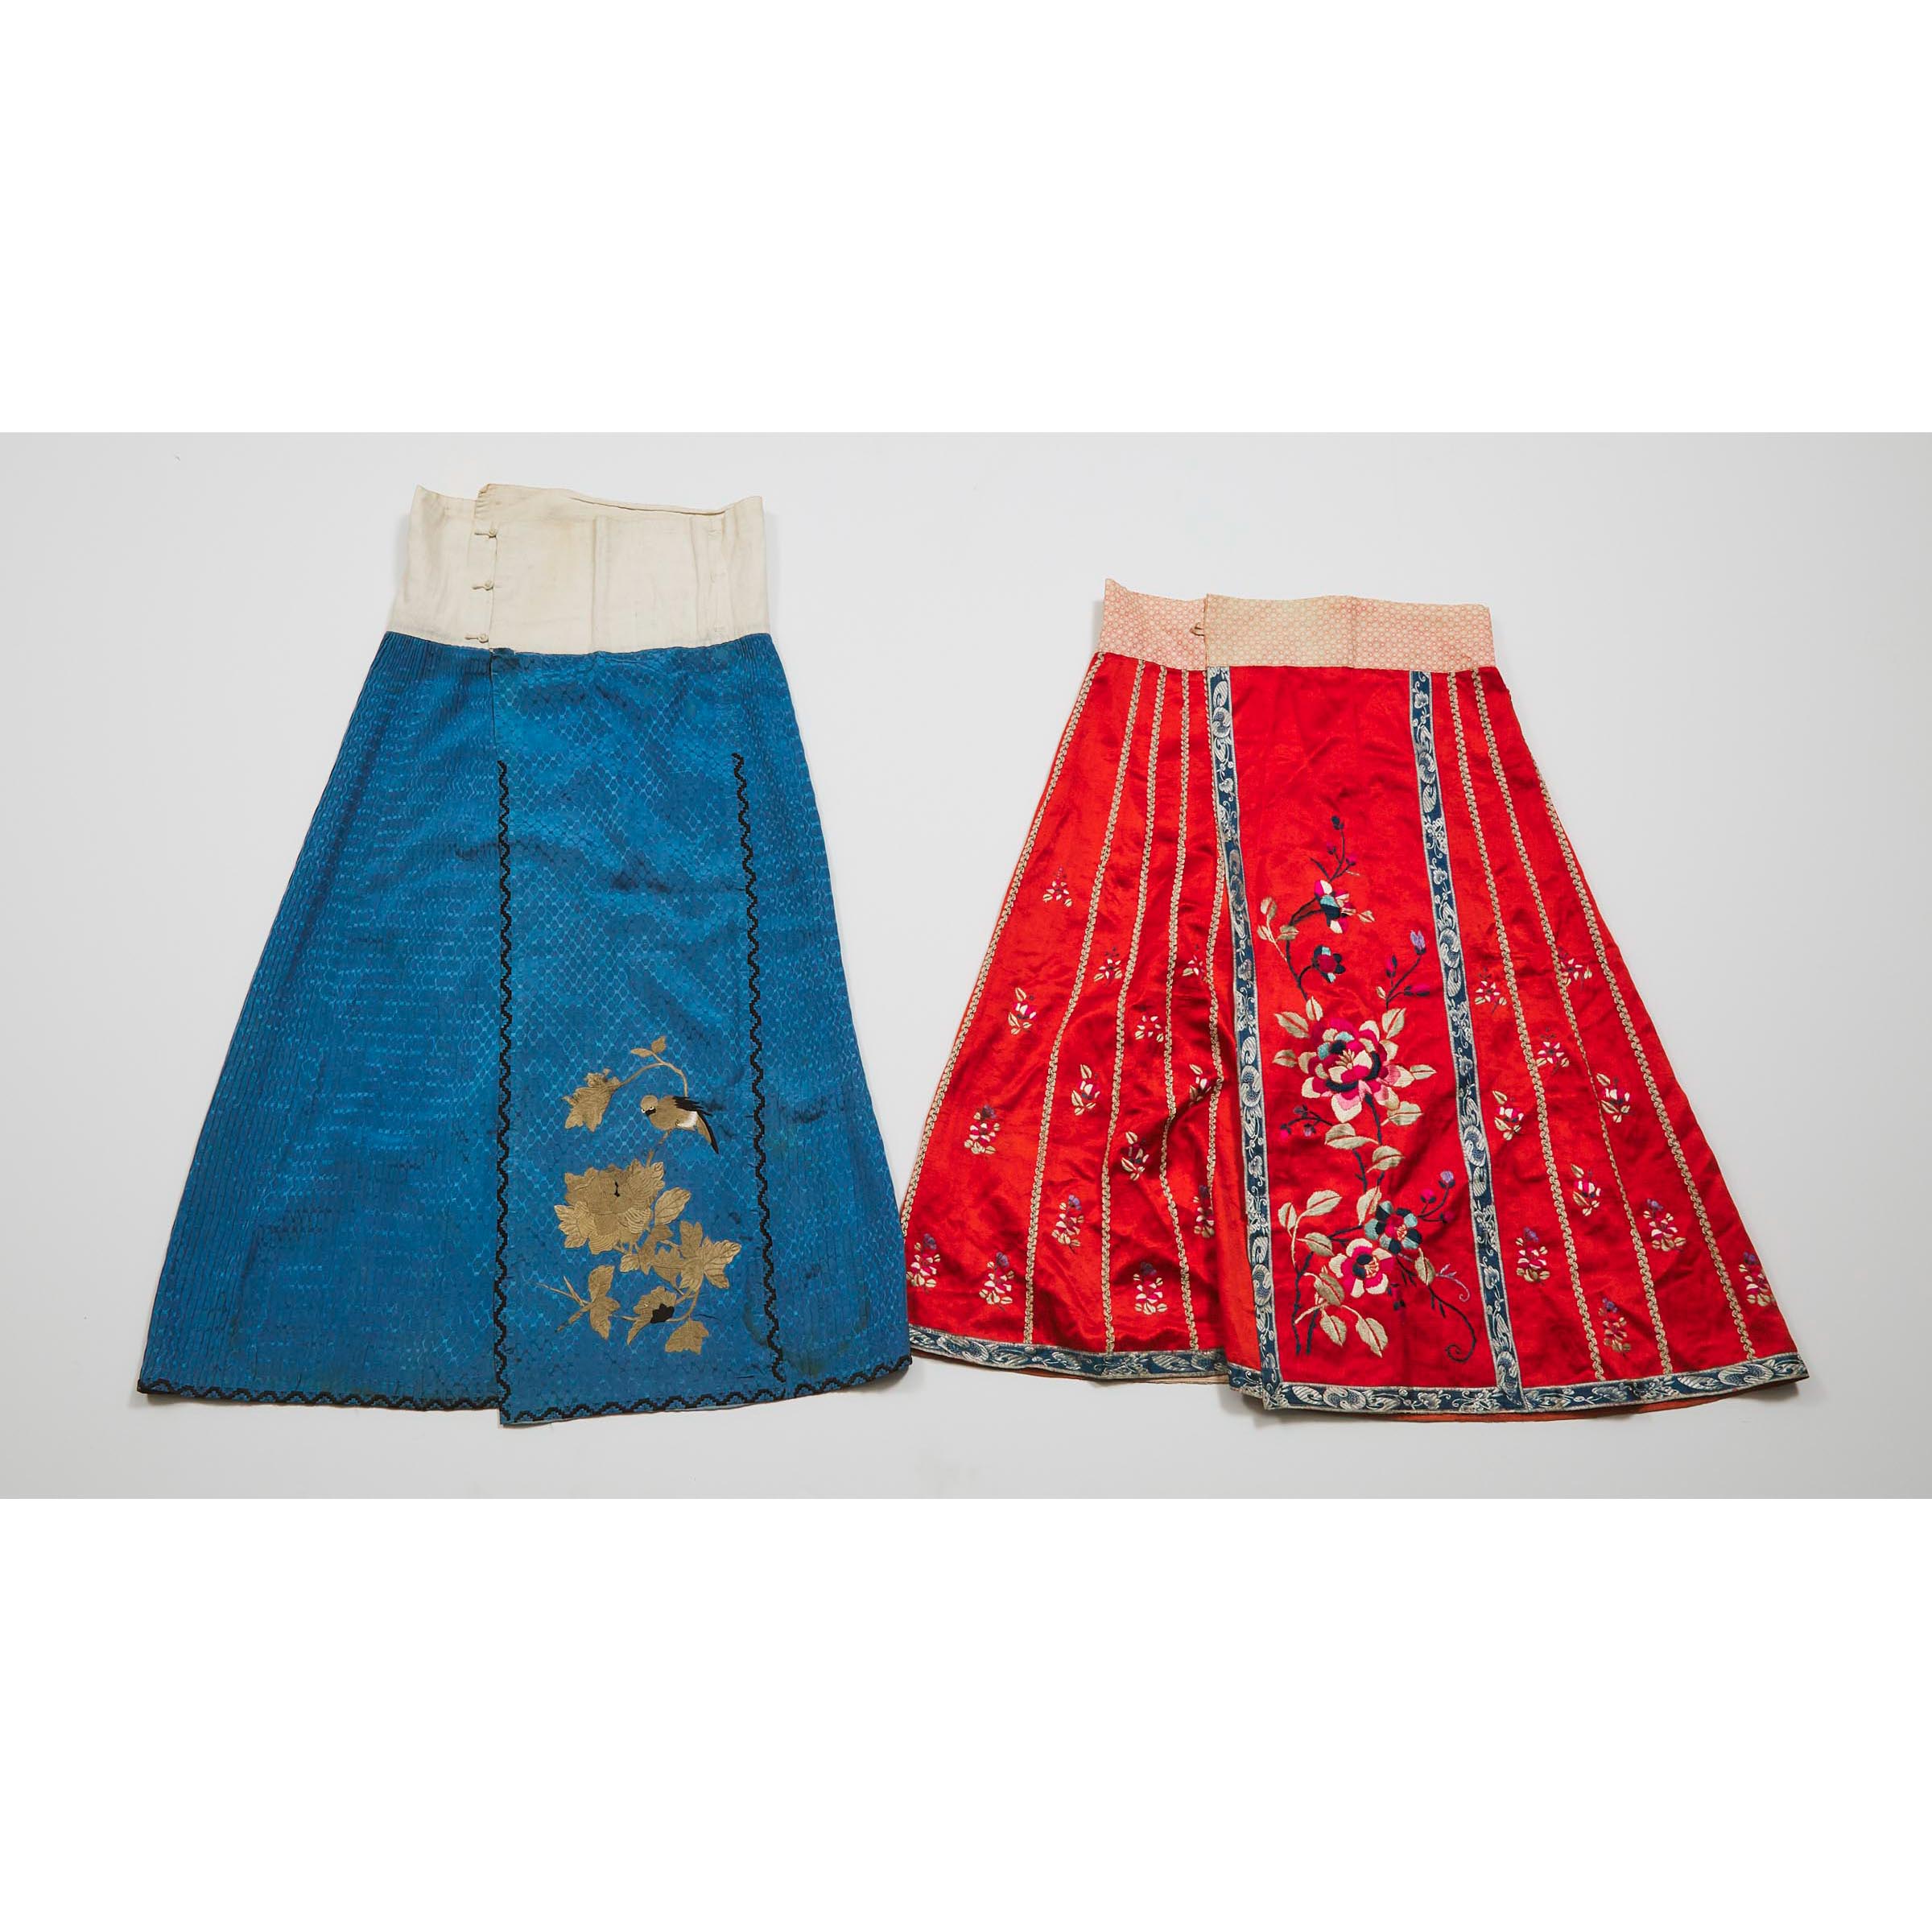 Two Chinese Embroidered Silk Skirts  3ac5a2